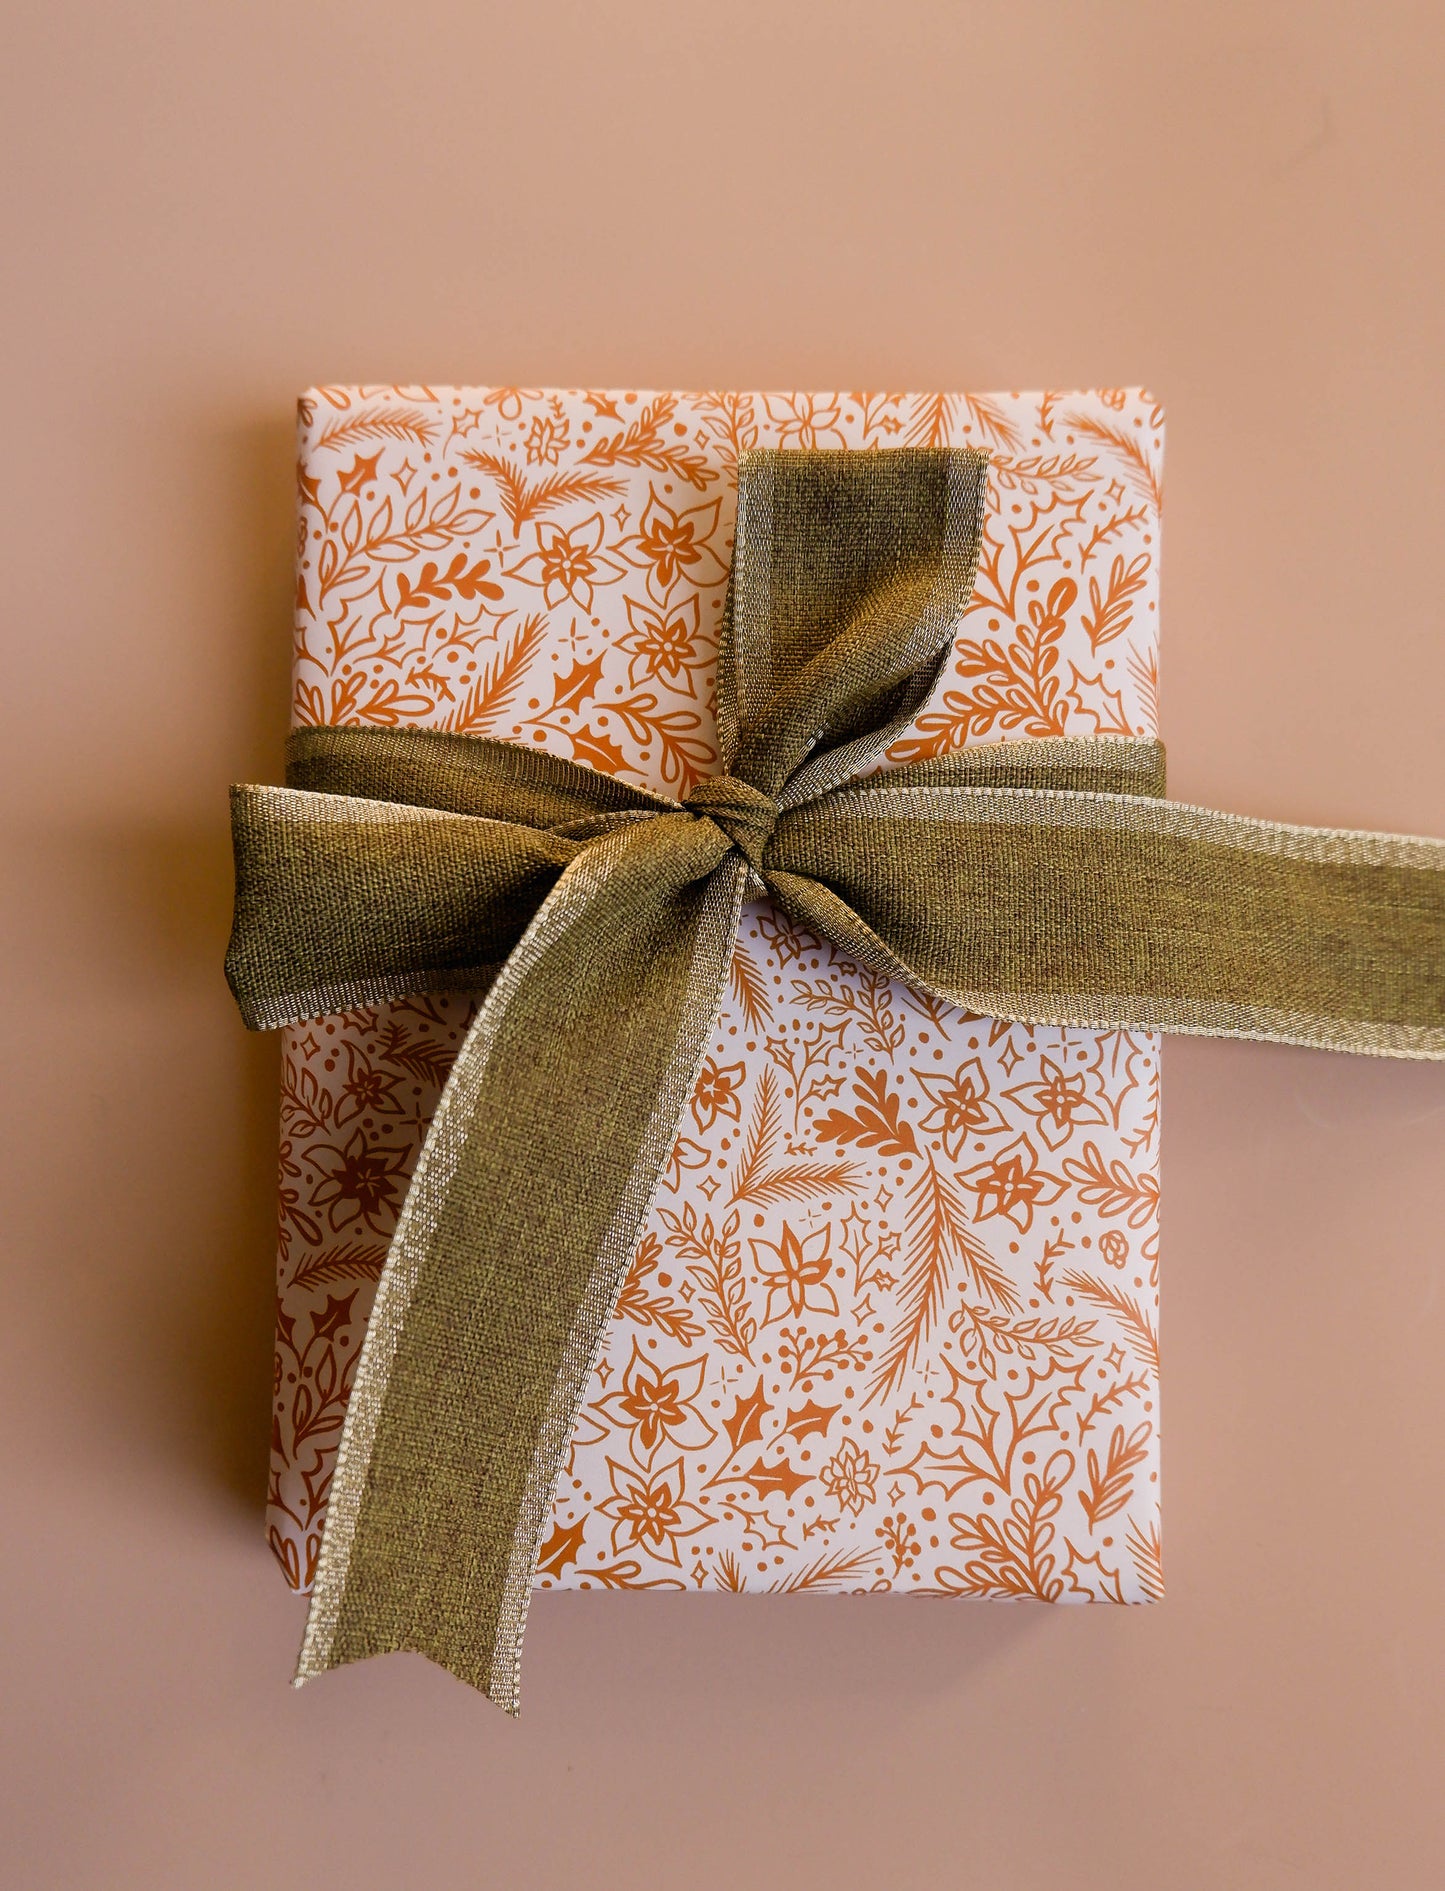 Graceful Doves Double Sided Gift Wrap